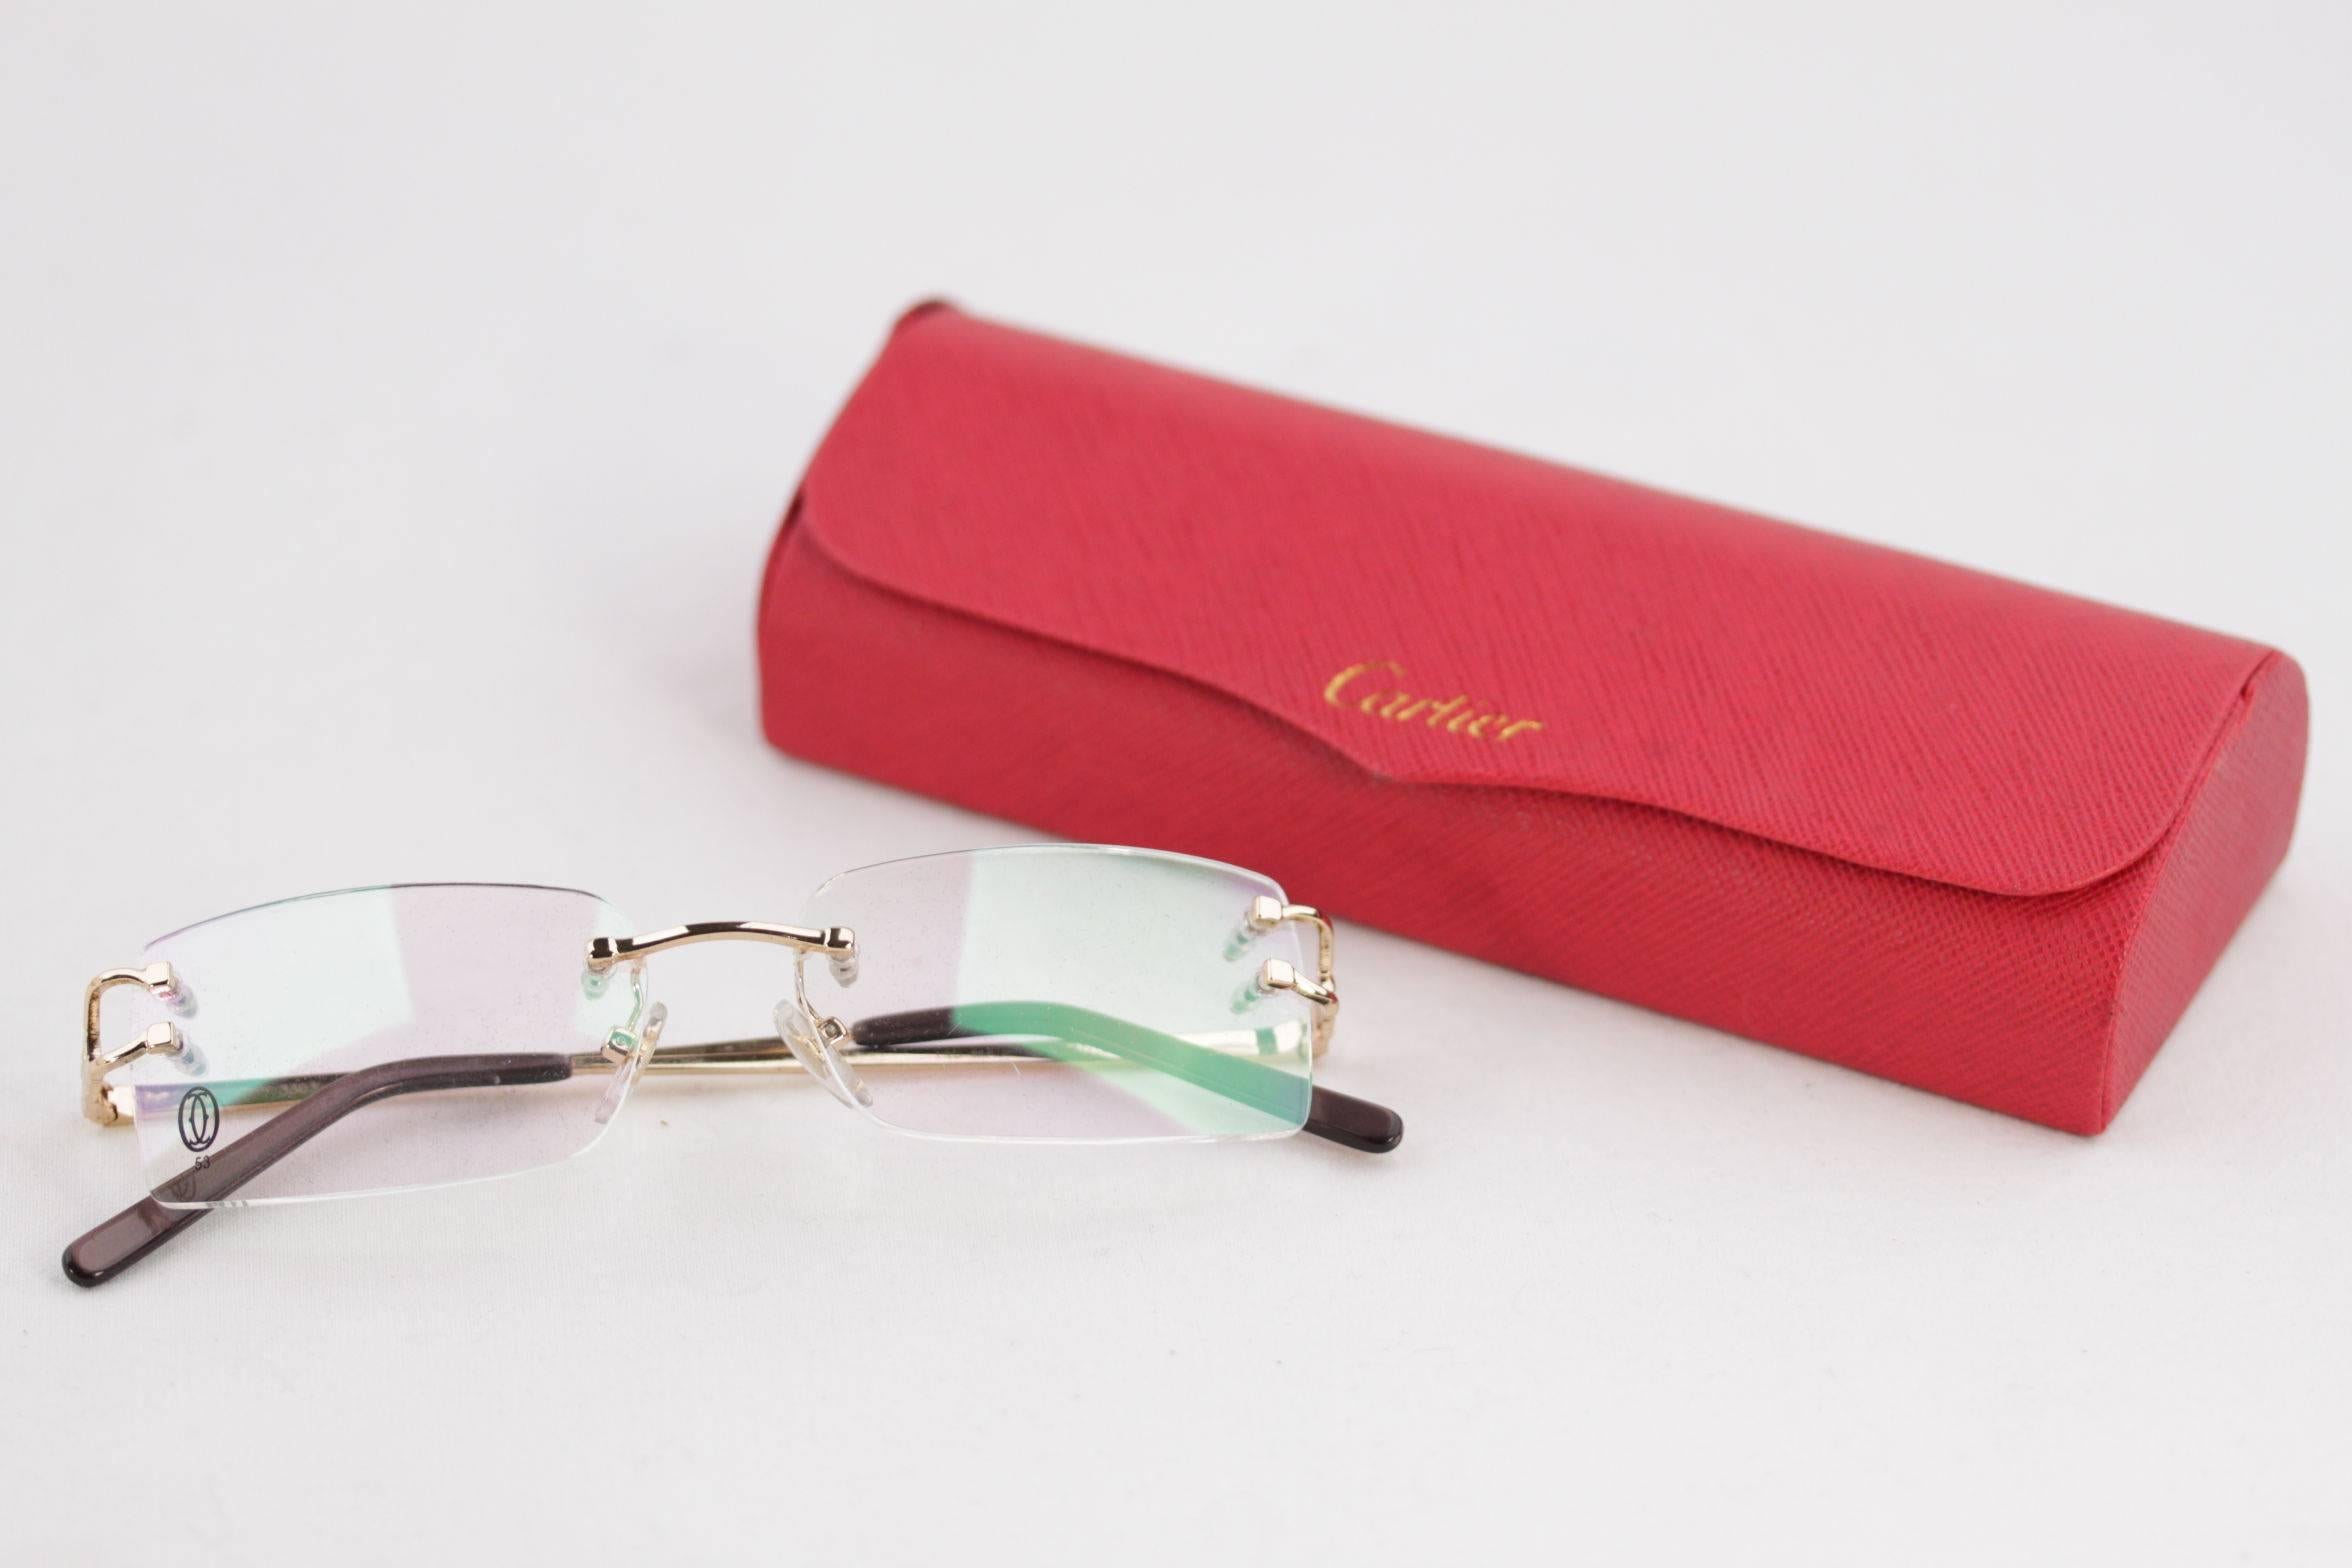 - 'CARTIER Paris' gold metal rimless frame - Made in France

- Model: 3303 - 53/17 - 140

- Rectangular design

- Original demo lenses

- CARTIER signatures on the sides

- Comes with CARTIER Red hardcase

Condition rate & details